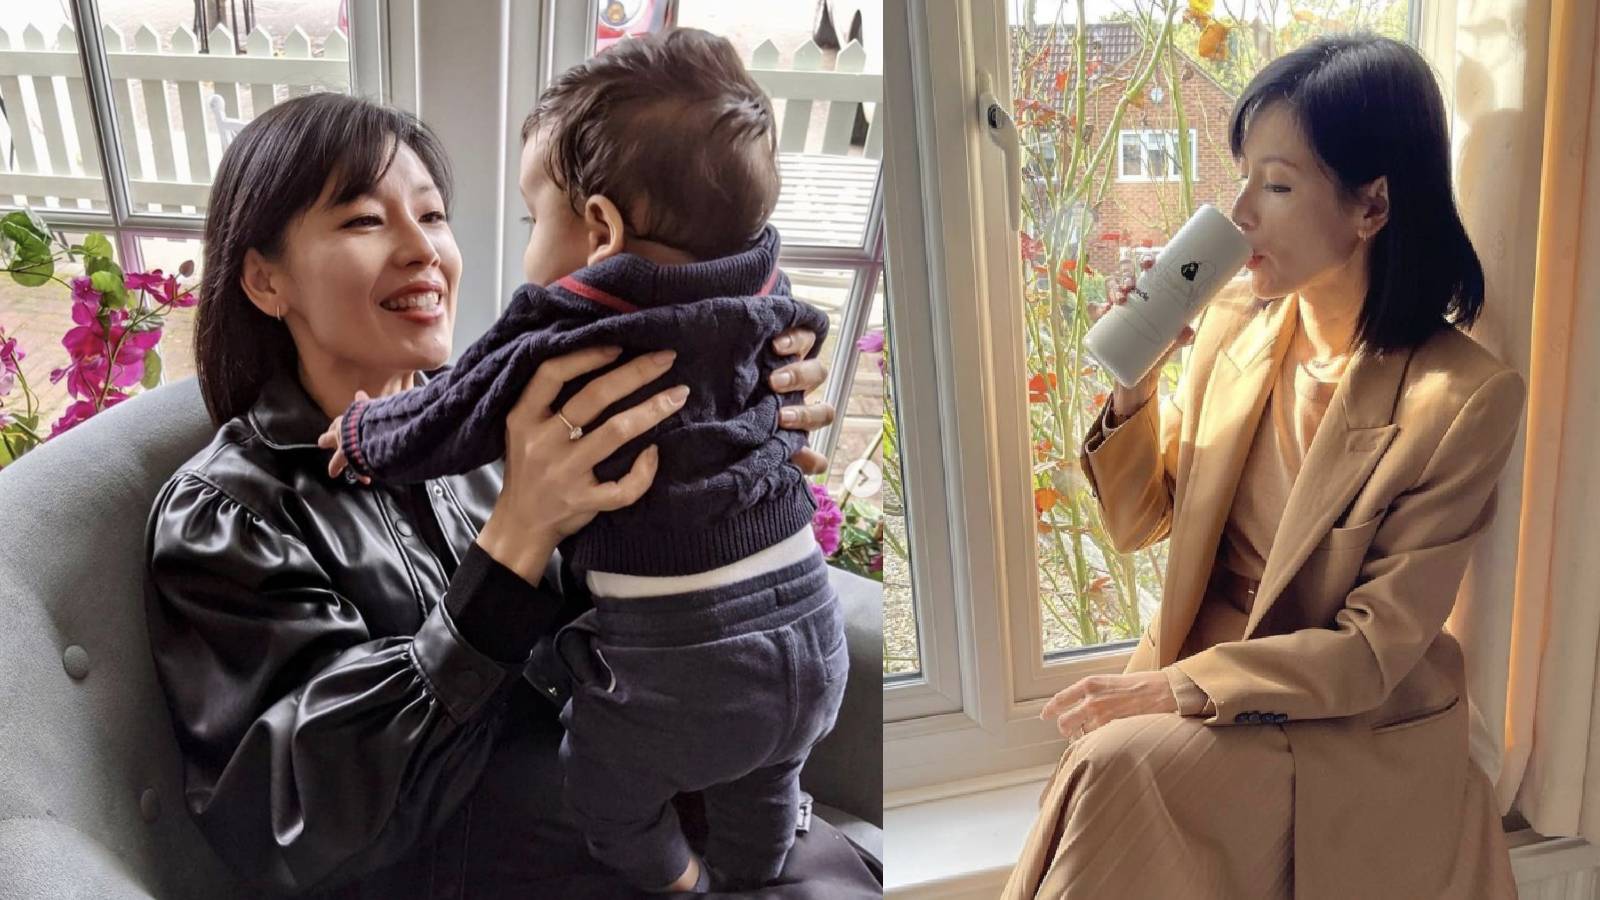 Sharon Au, 46, Says Her Biggest Regret Is "Not Having Children"; Netizens Tell Her That It’s Not Too Late